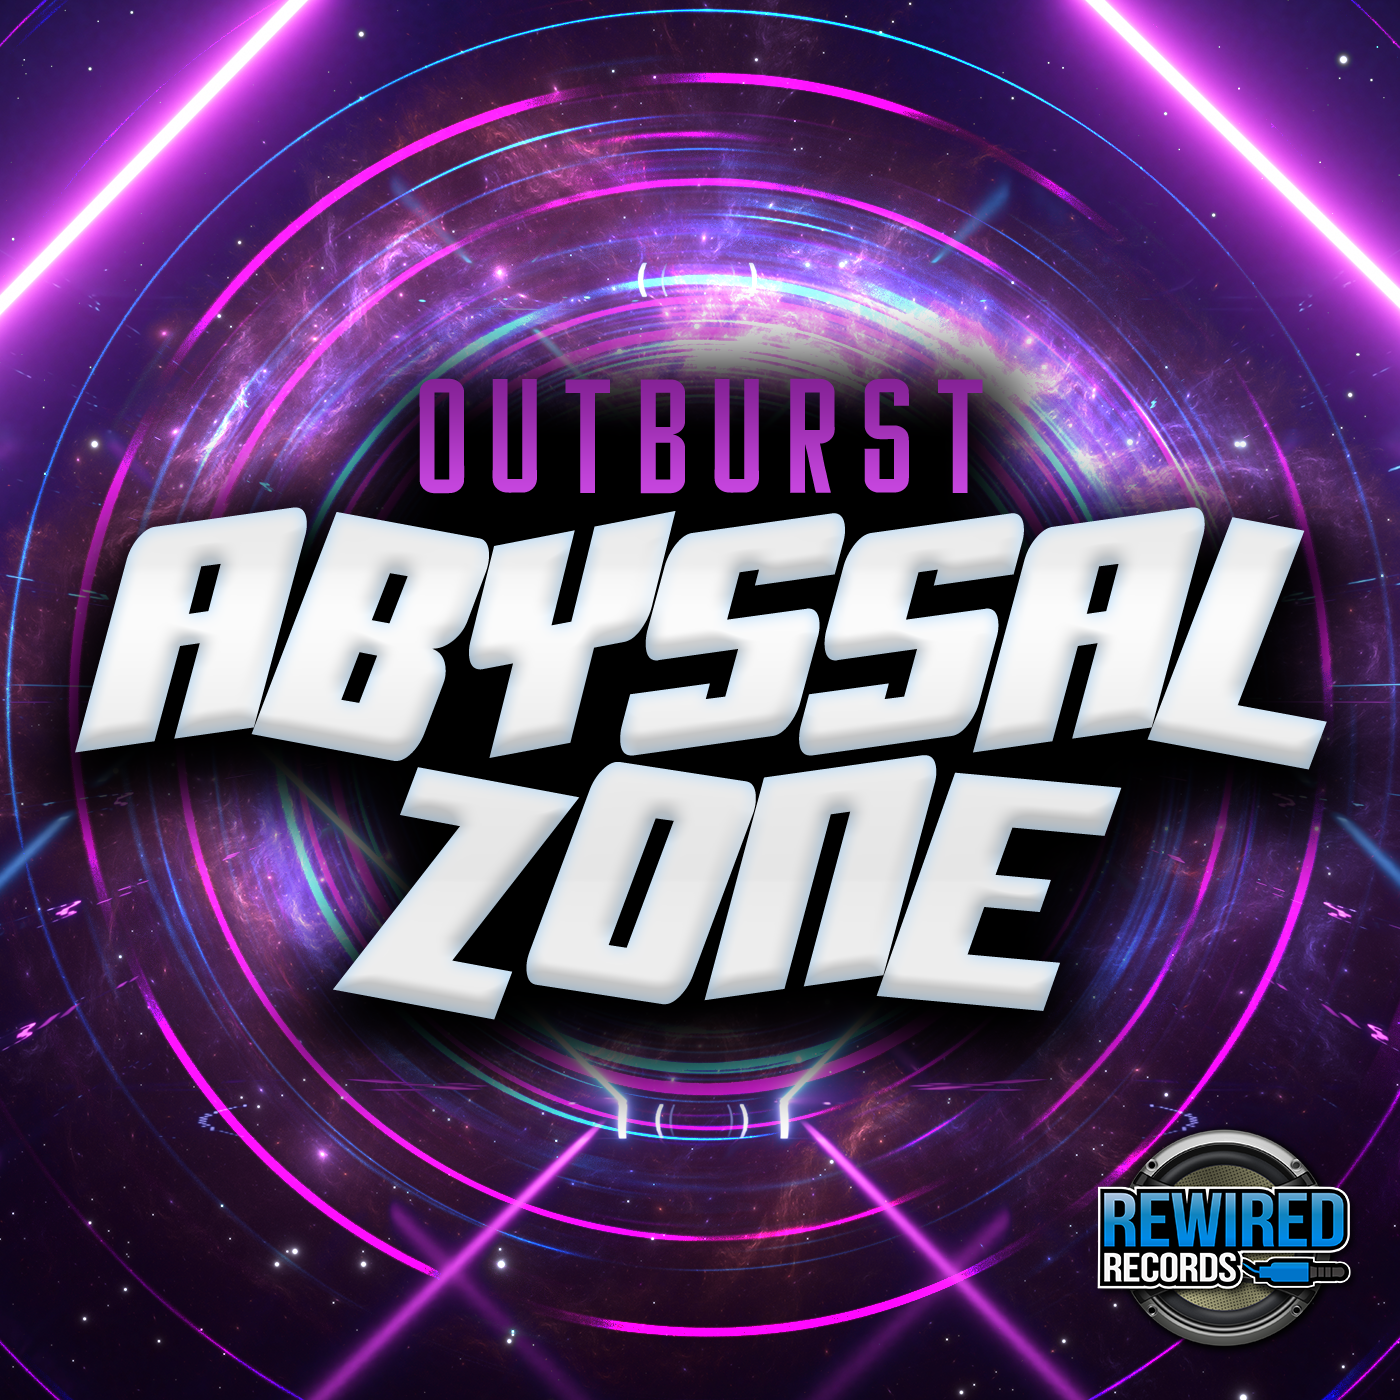 Outburst - Abyssal Zone - Rewired Records